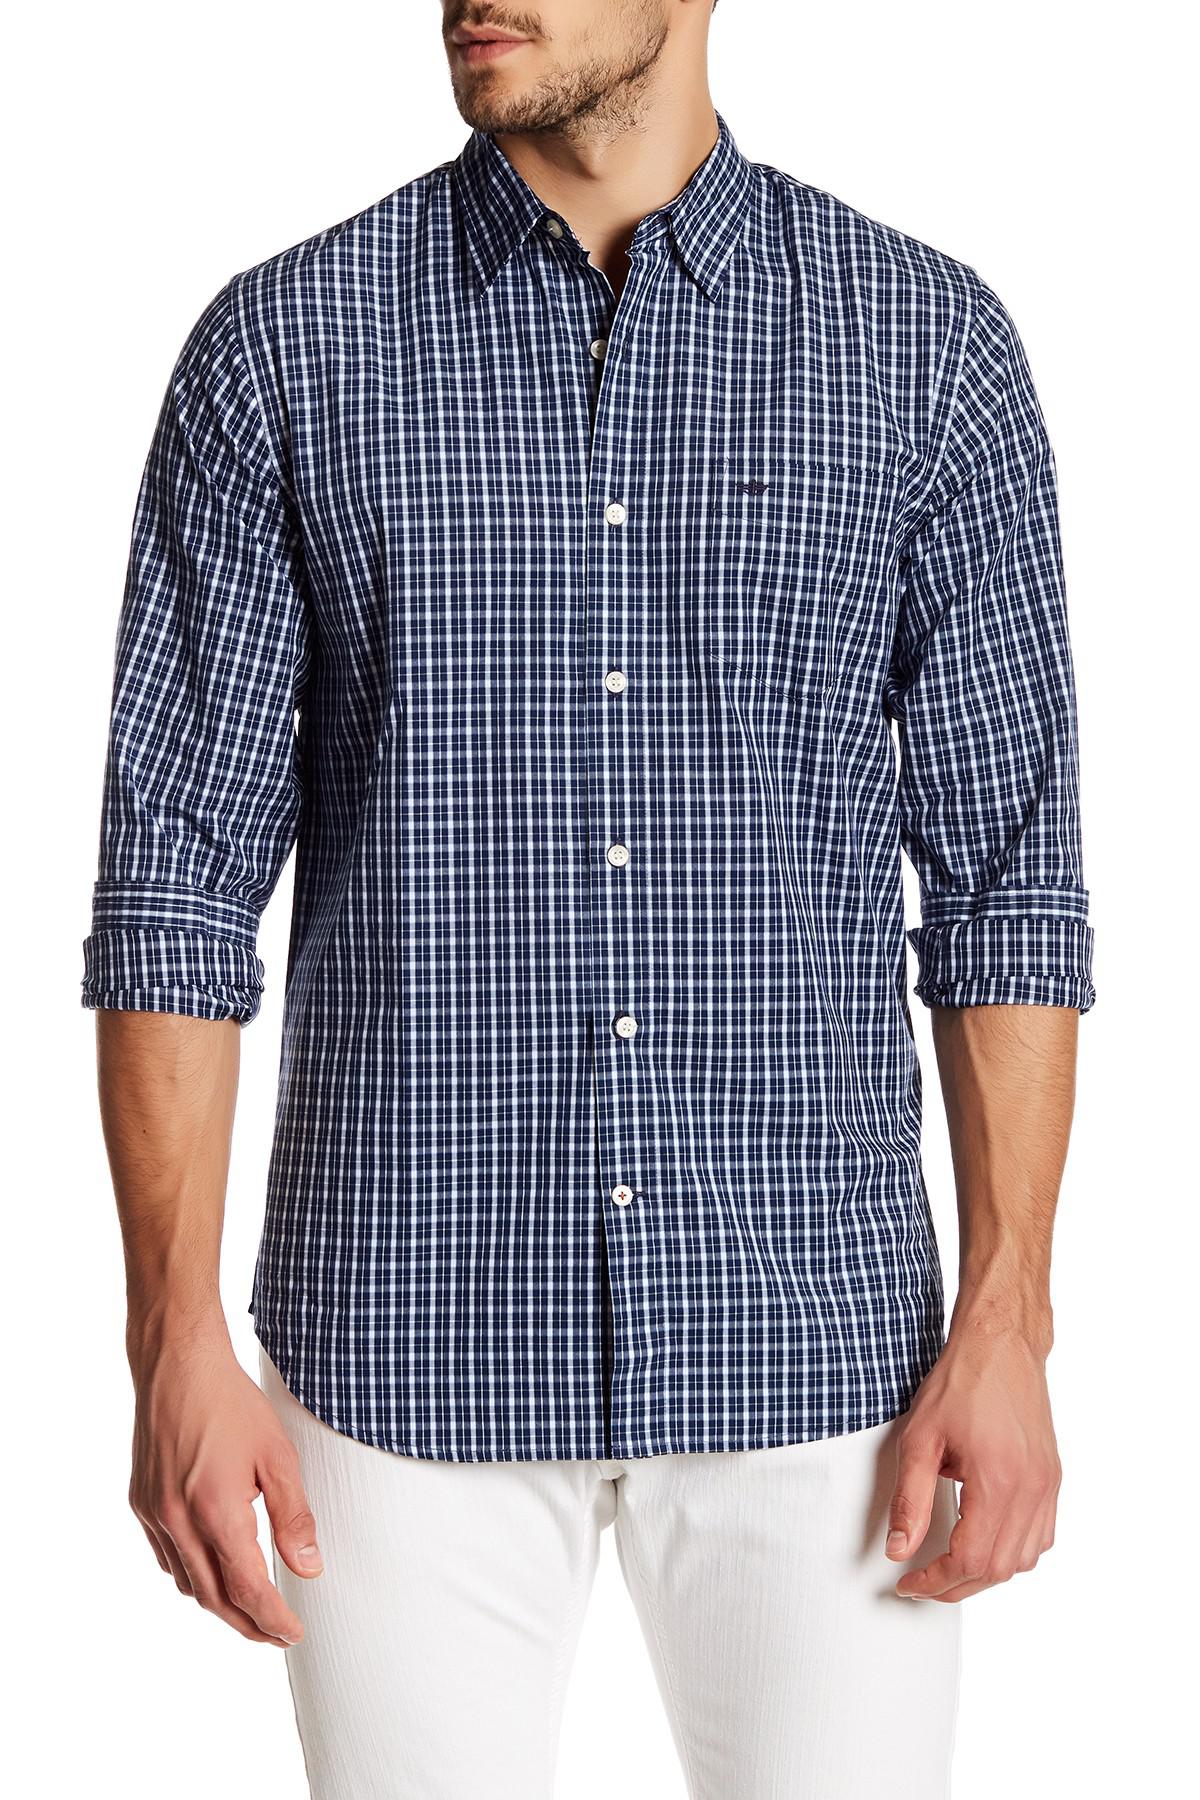 Dockers Easy Casual Hamilton Long Sleeve Plaid Shirt in Blue for Men - Lyst